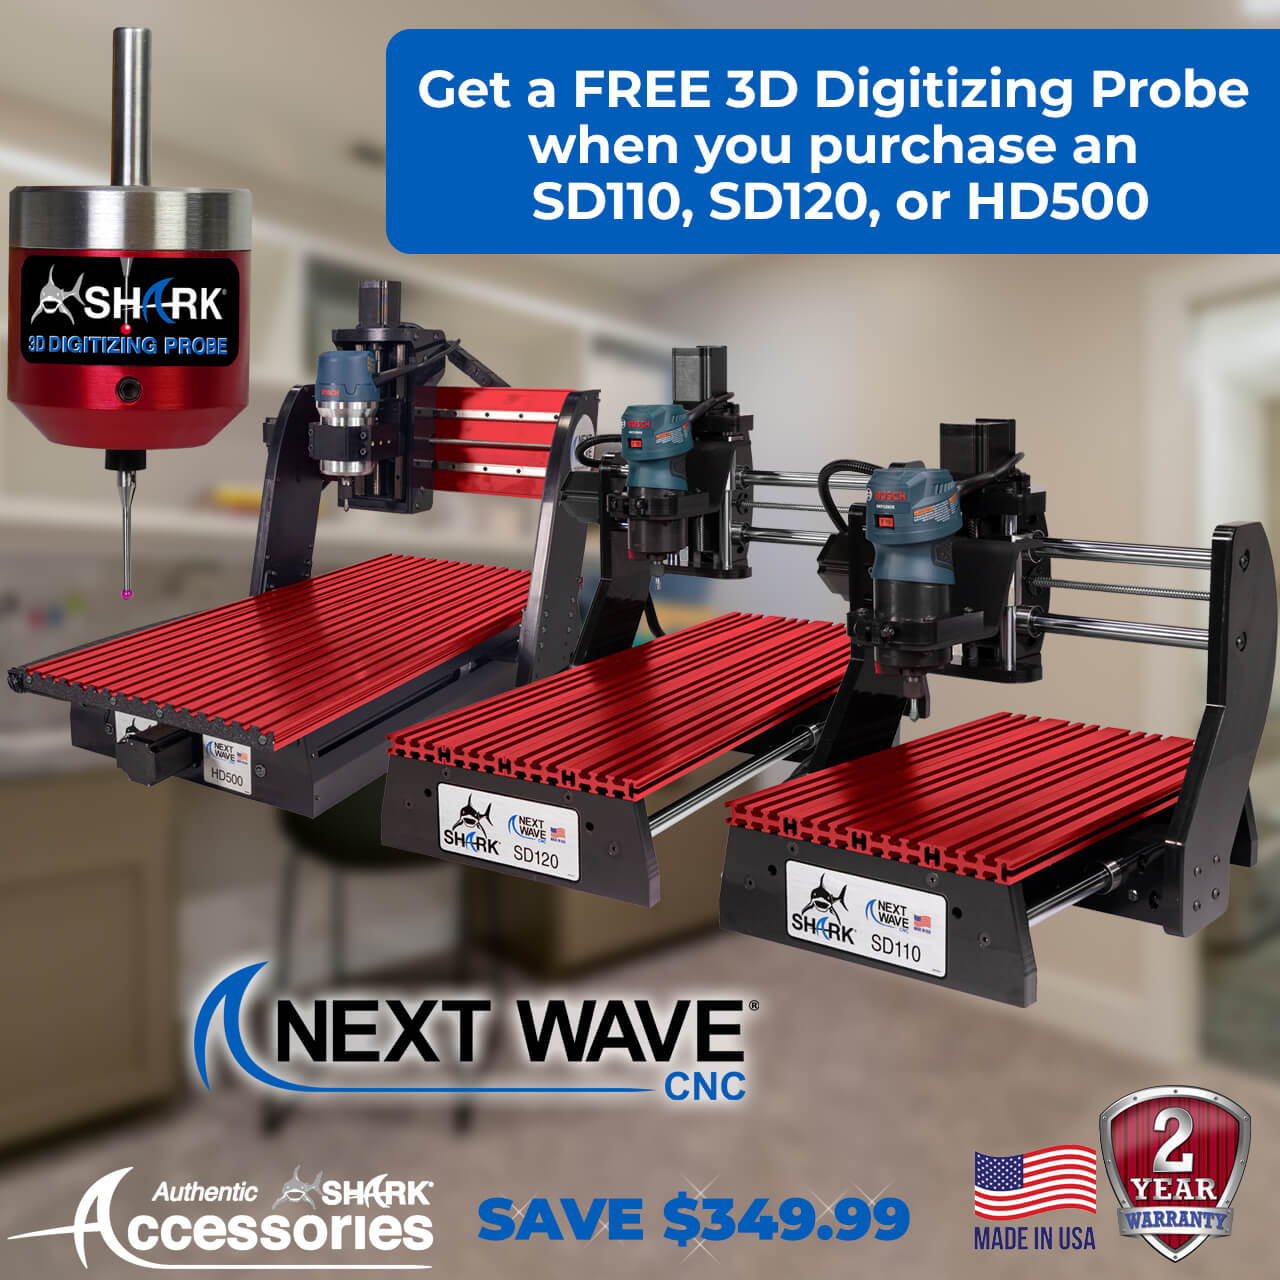 Get a FREE 3D Digitizing Probe when you purchase an SD110, SD120, or HD500